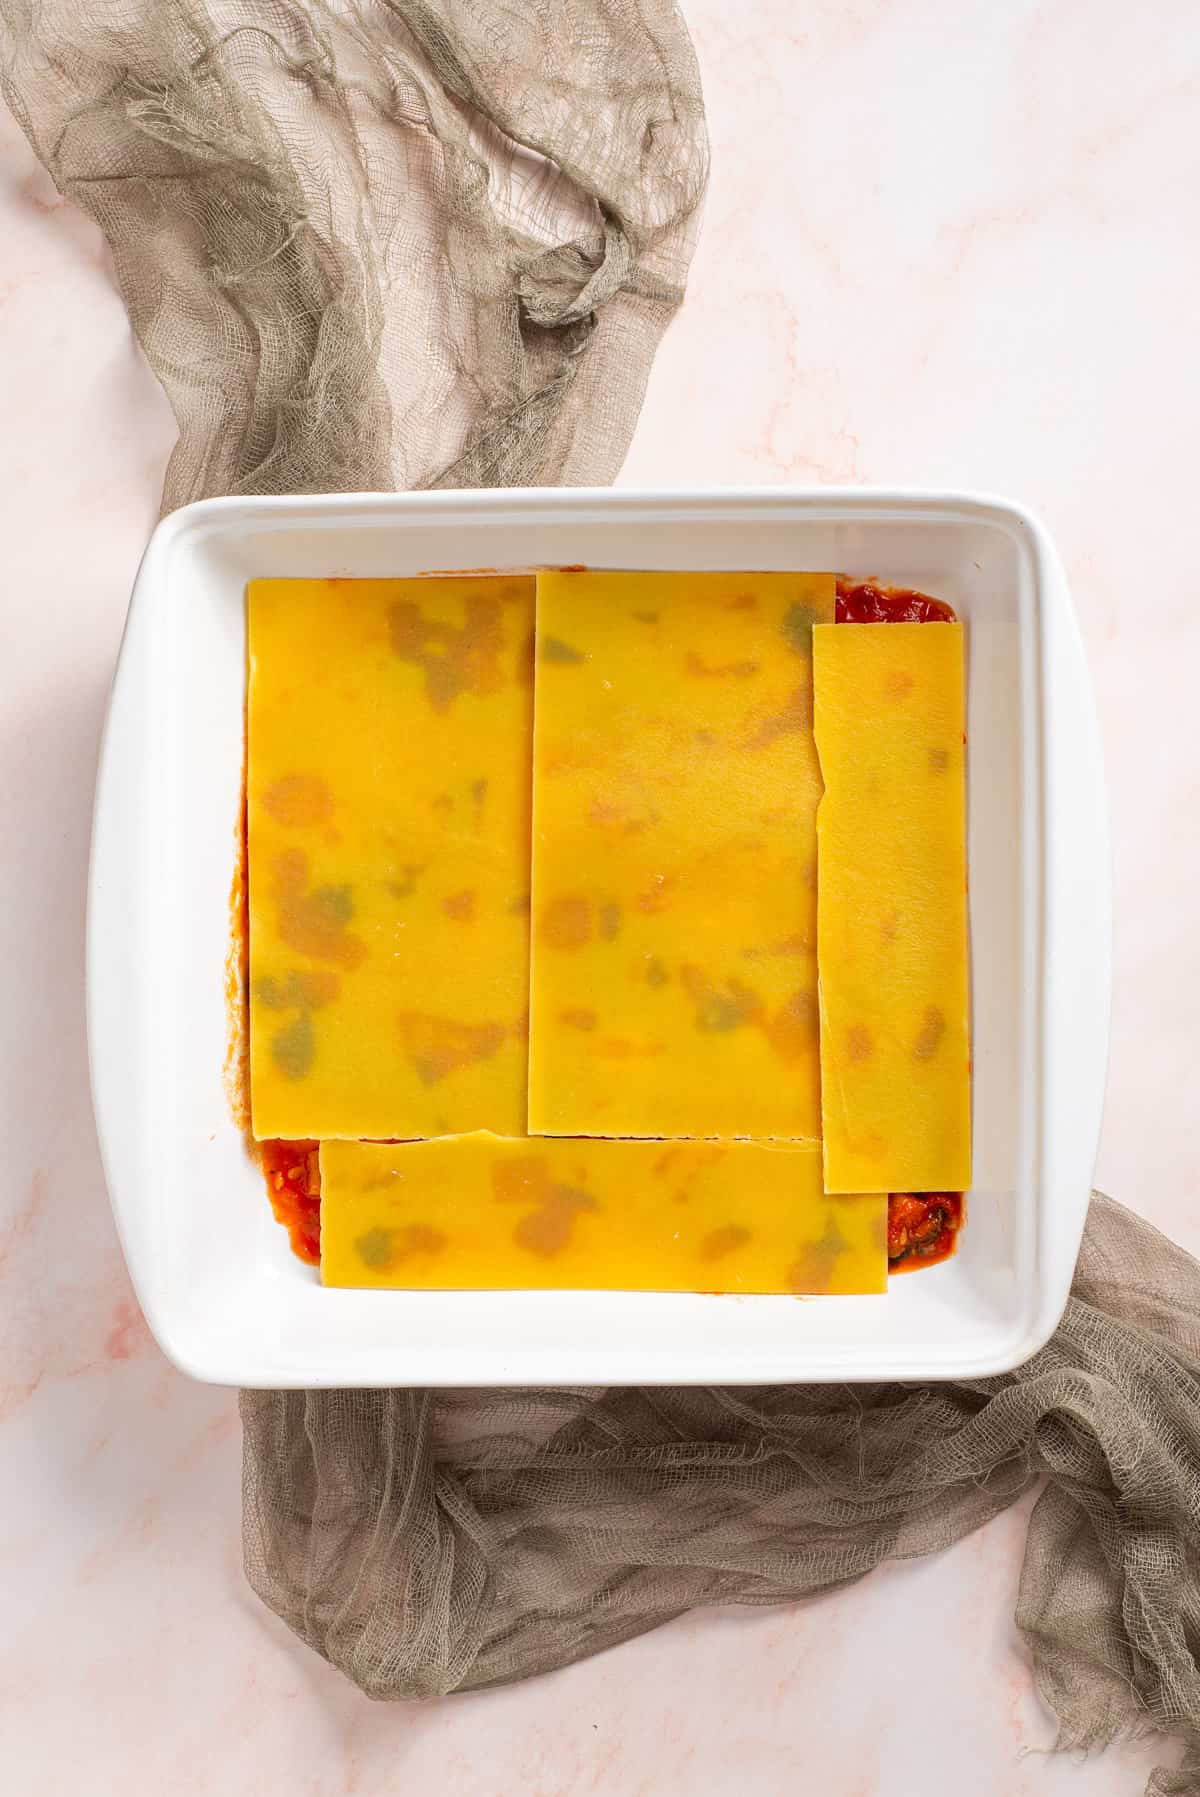 An image of the lasagna being assembled together in a baking dish, adding layer by layer.